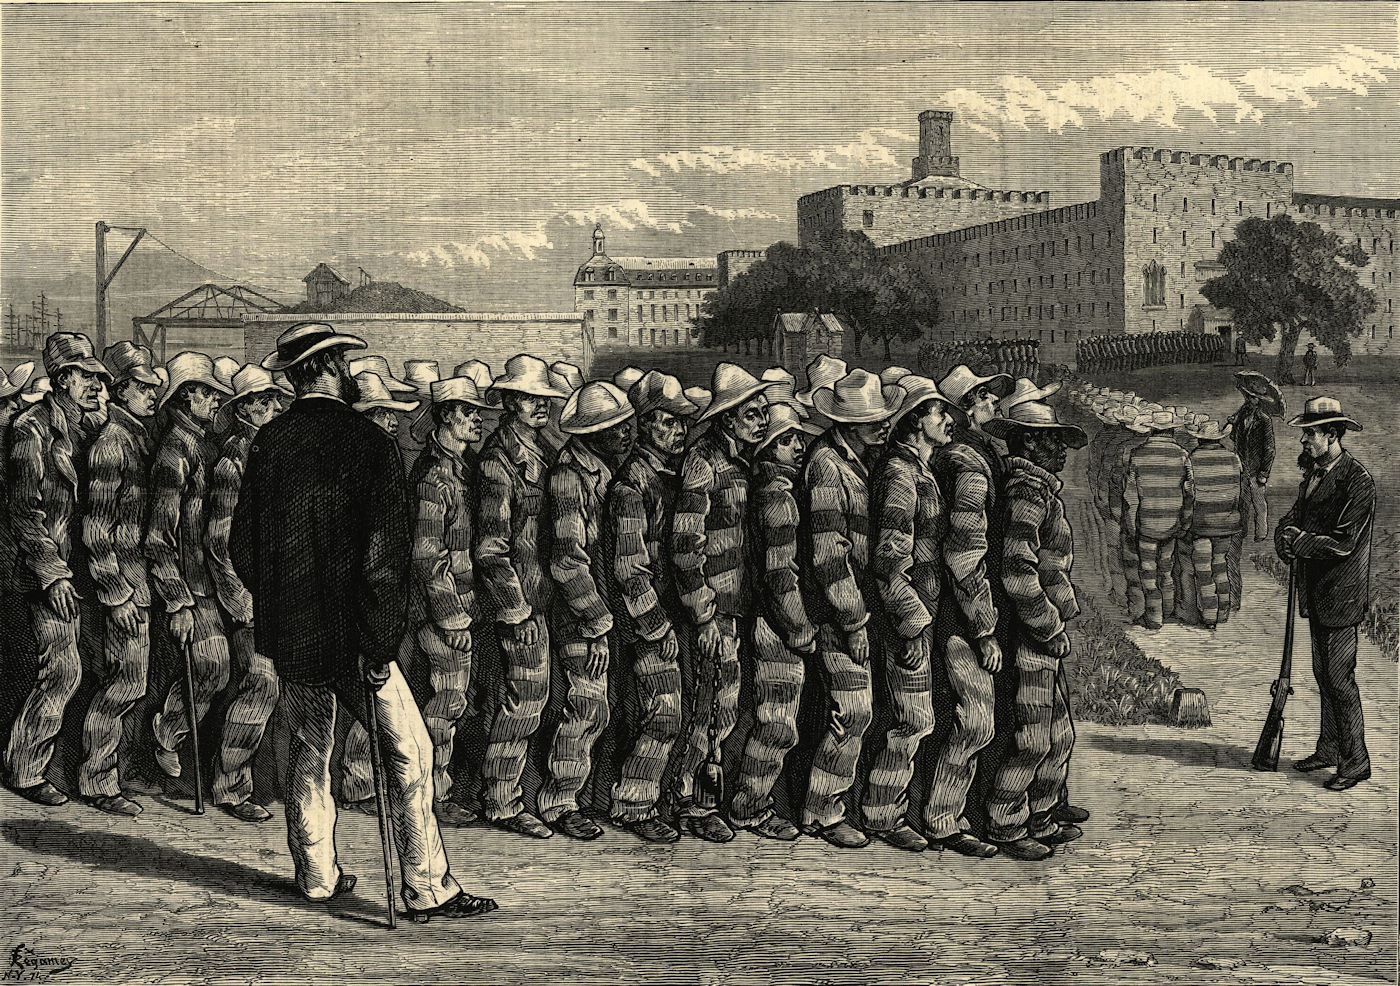 Associate Product Blackwell's (now Roosevelt) Island prison, New York. Returning from work 1876